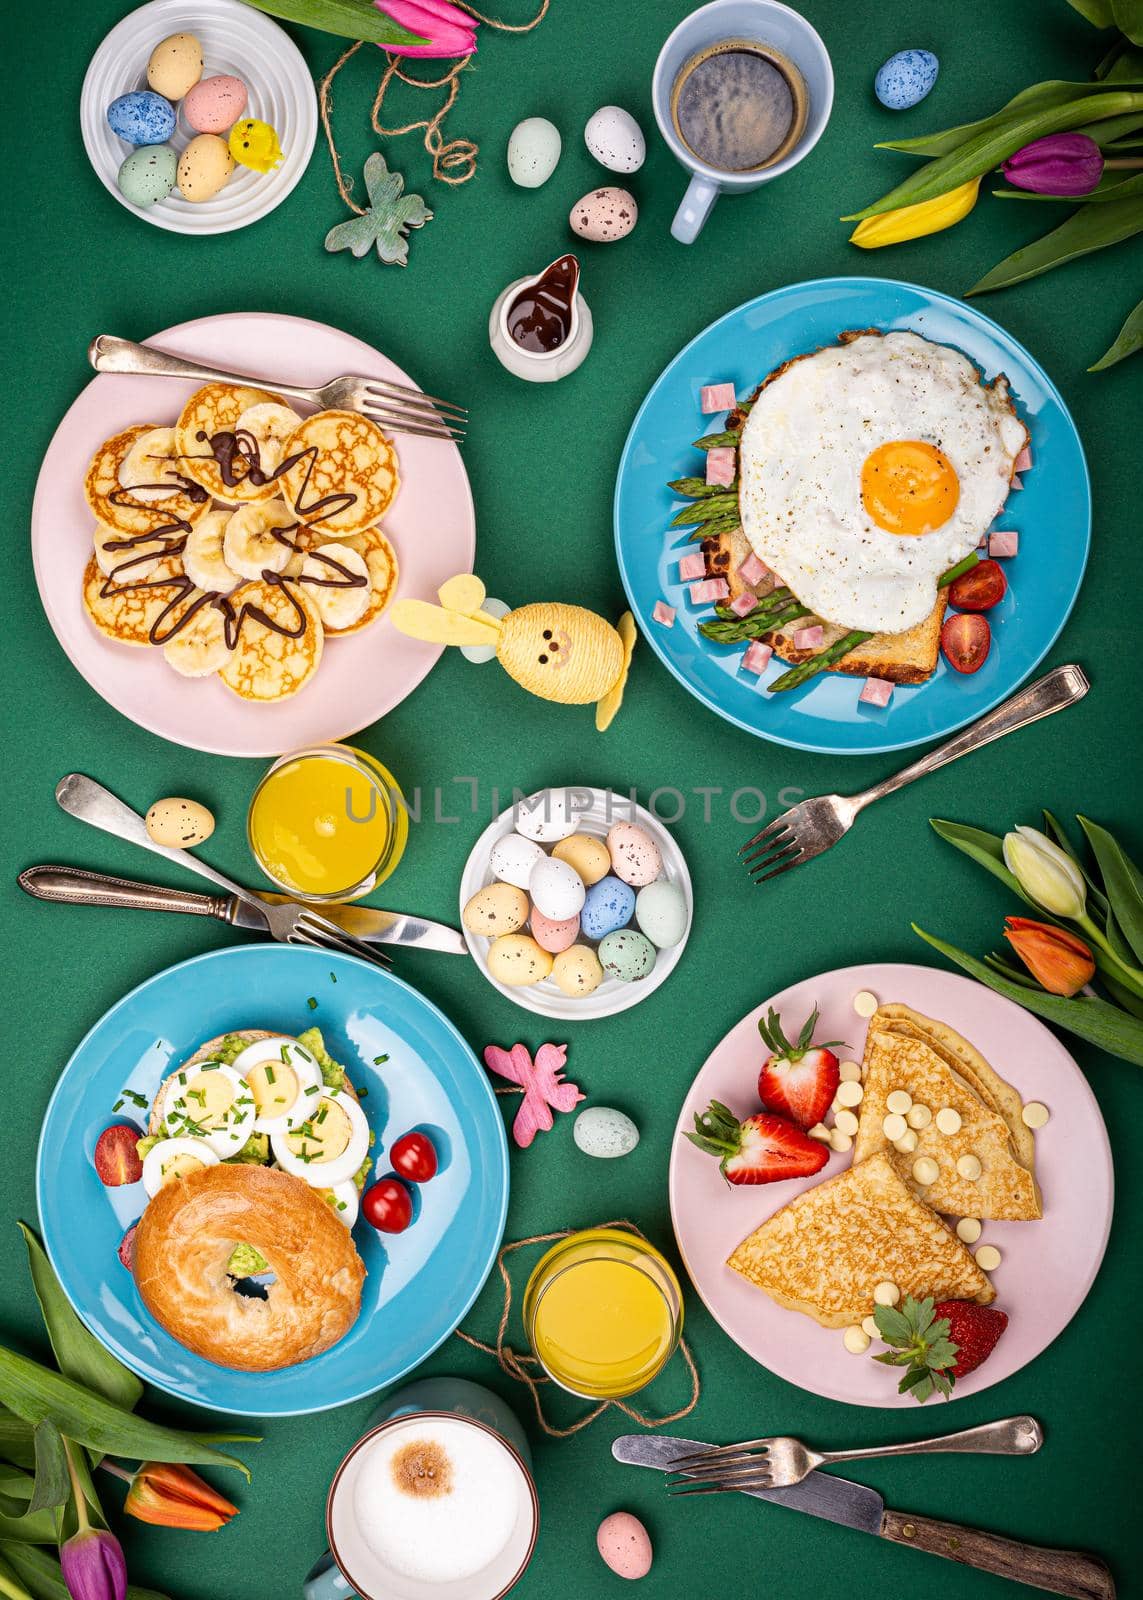 Easter composition with breakfast flat lay with scrambled eggs bagels, tulips, pancakes, bread toast with fried egg and green asparagus, colored quail eggs. Top view.